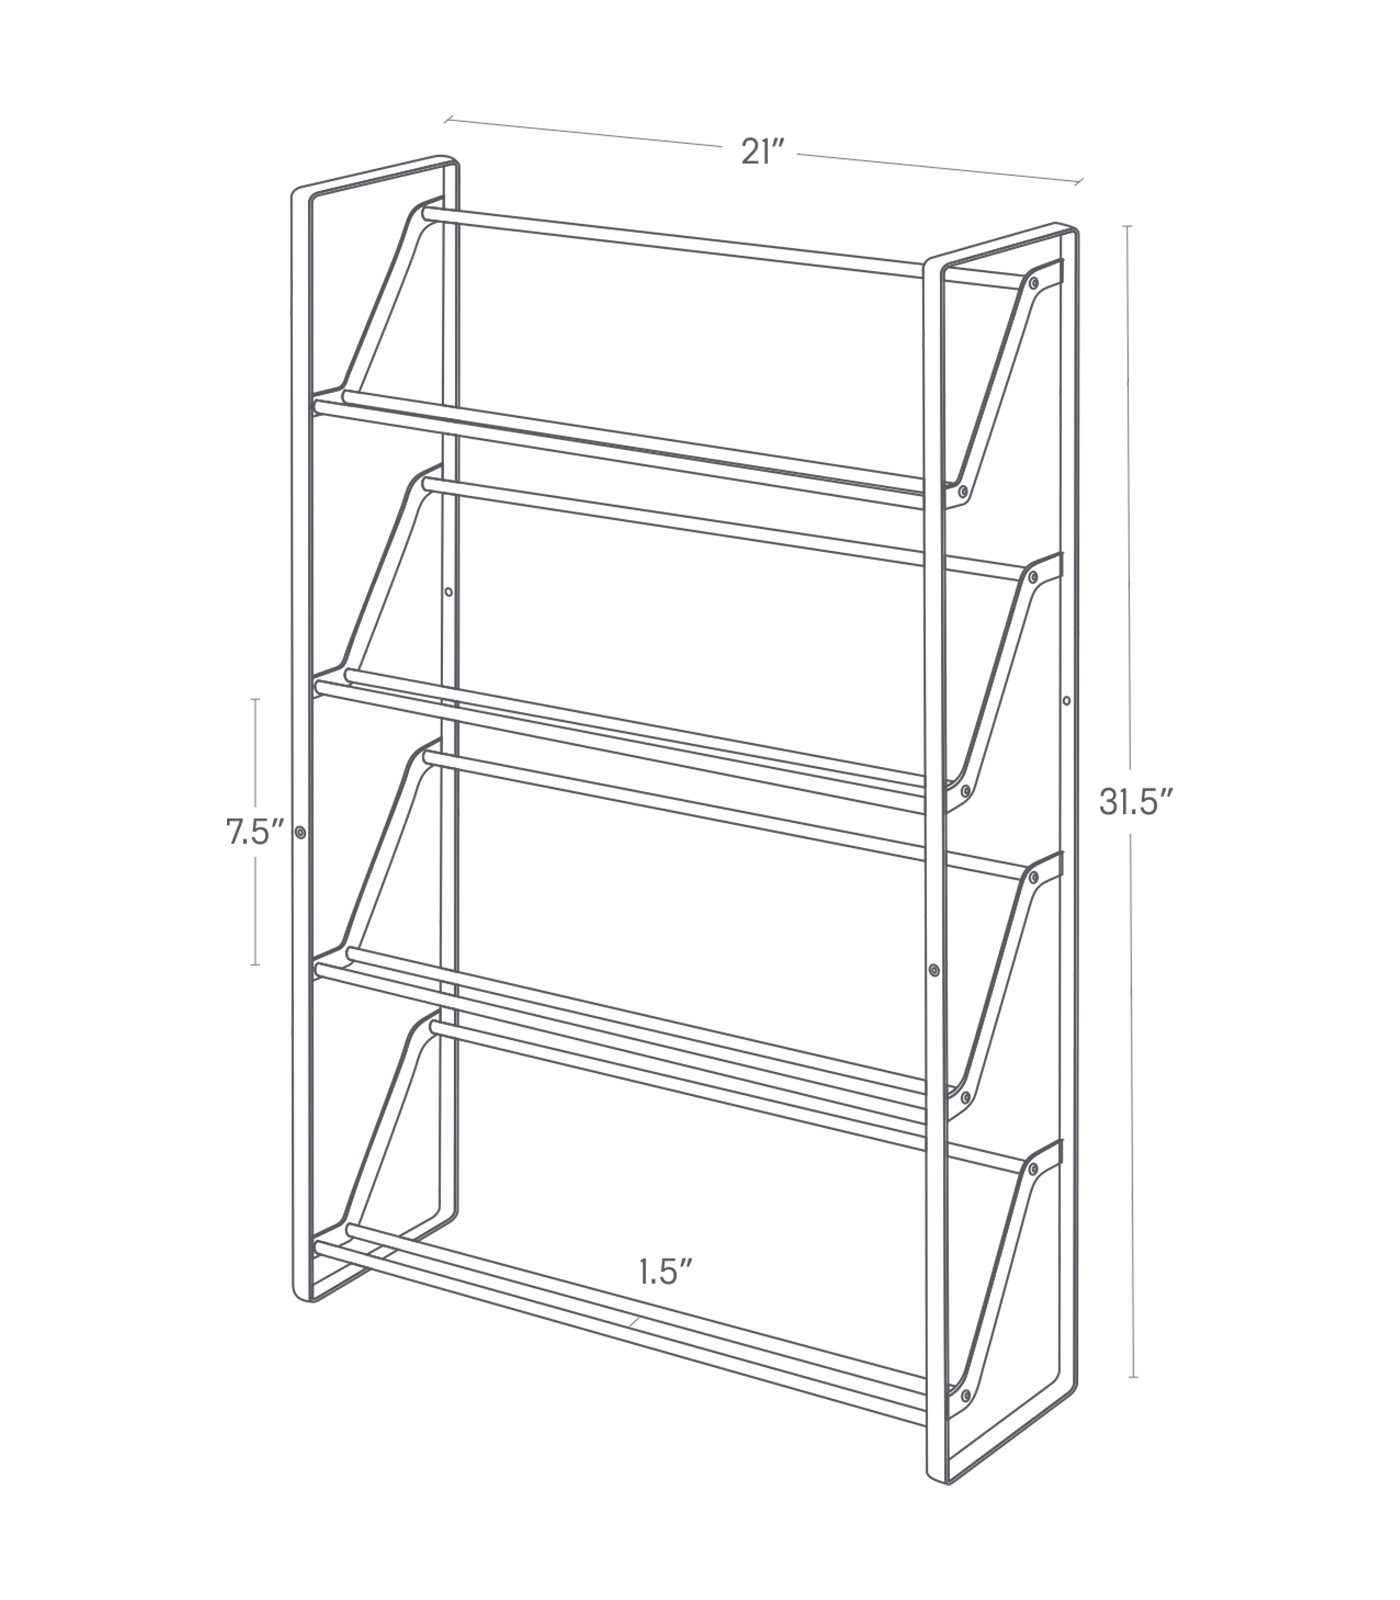 Dimension image for Slim Shoe Rack showing a total length of 21